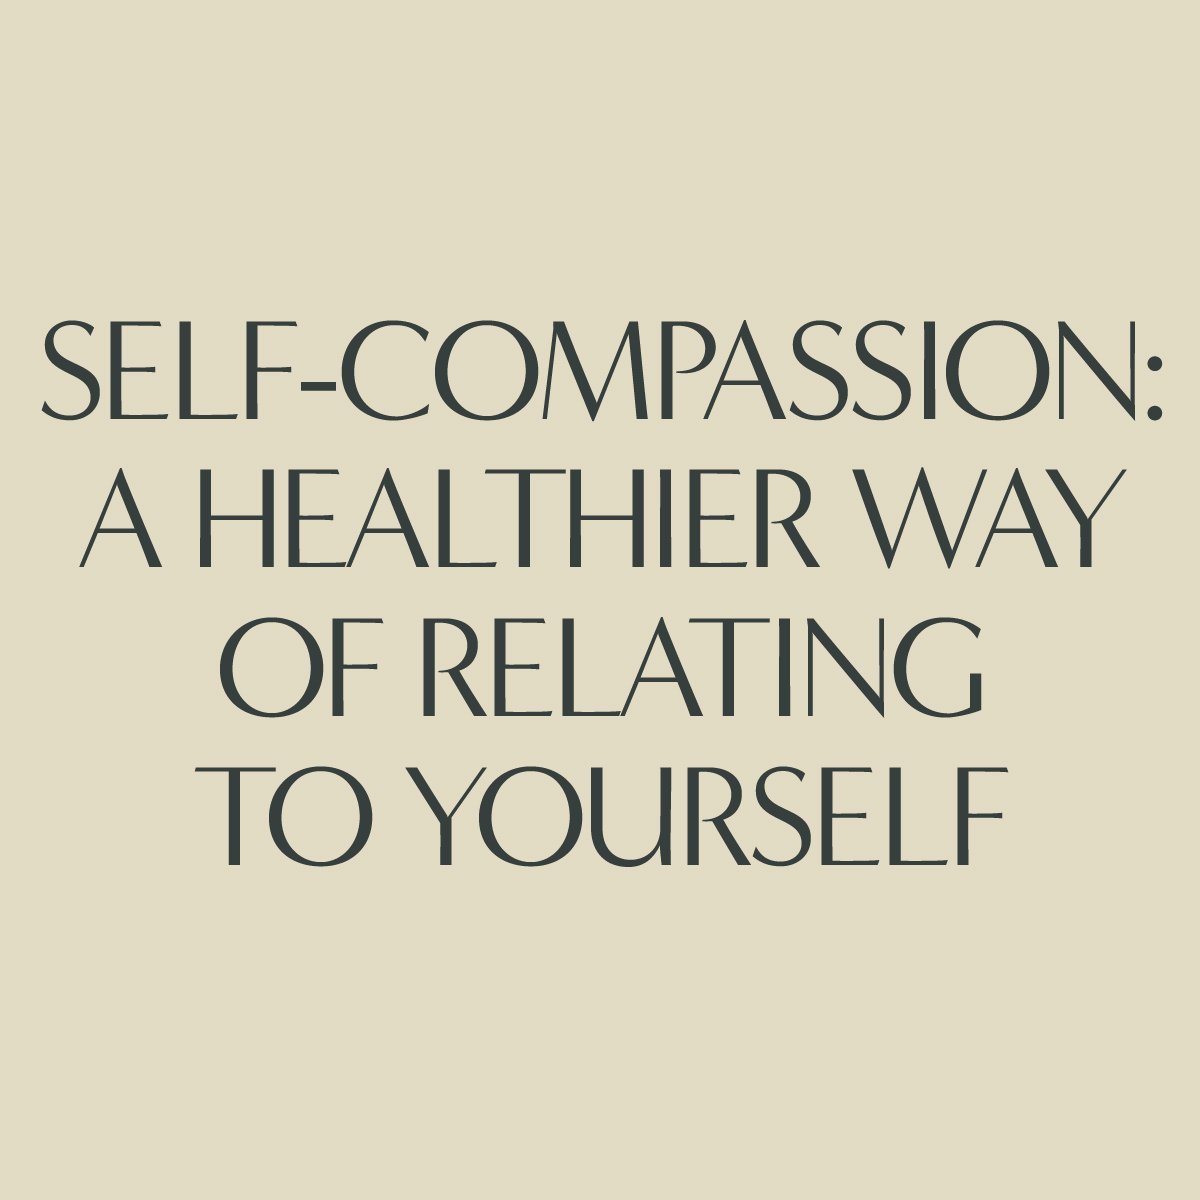 __SELF-COMPASSION--A HEALTHIER WAY-OF RELATING-TO YOURSELF.jpg